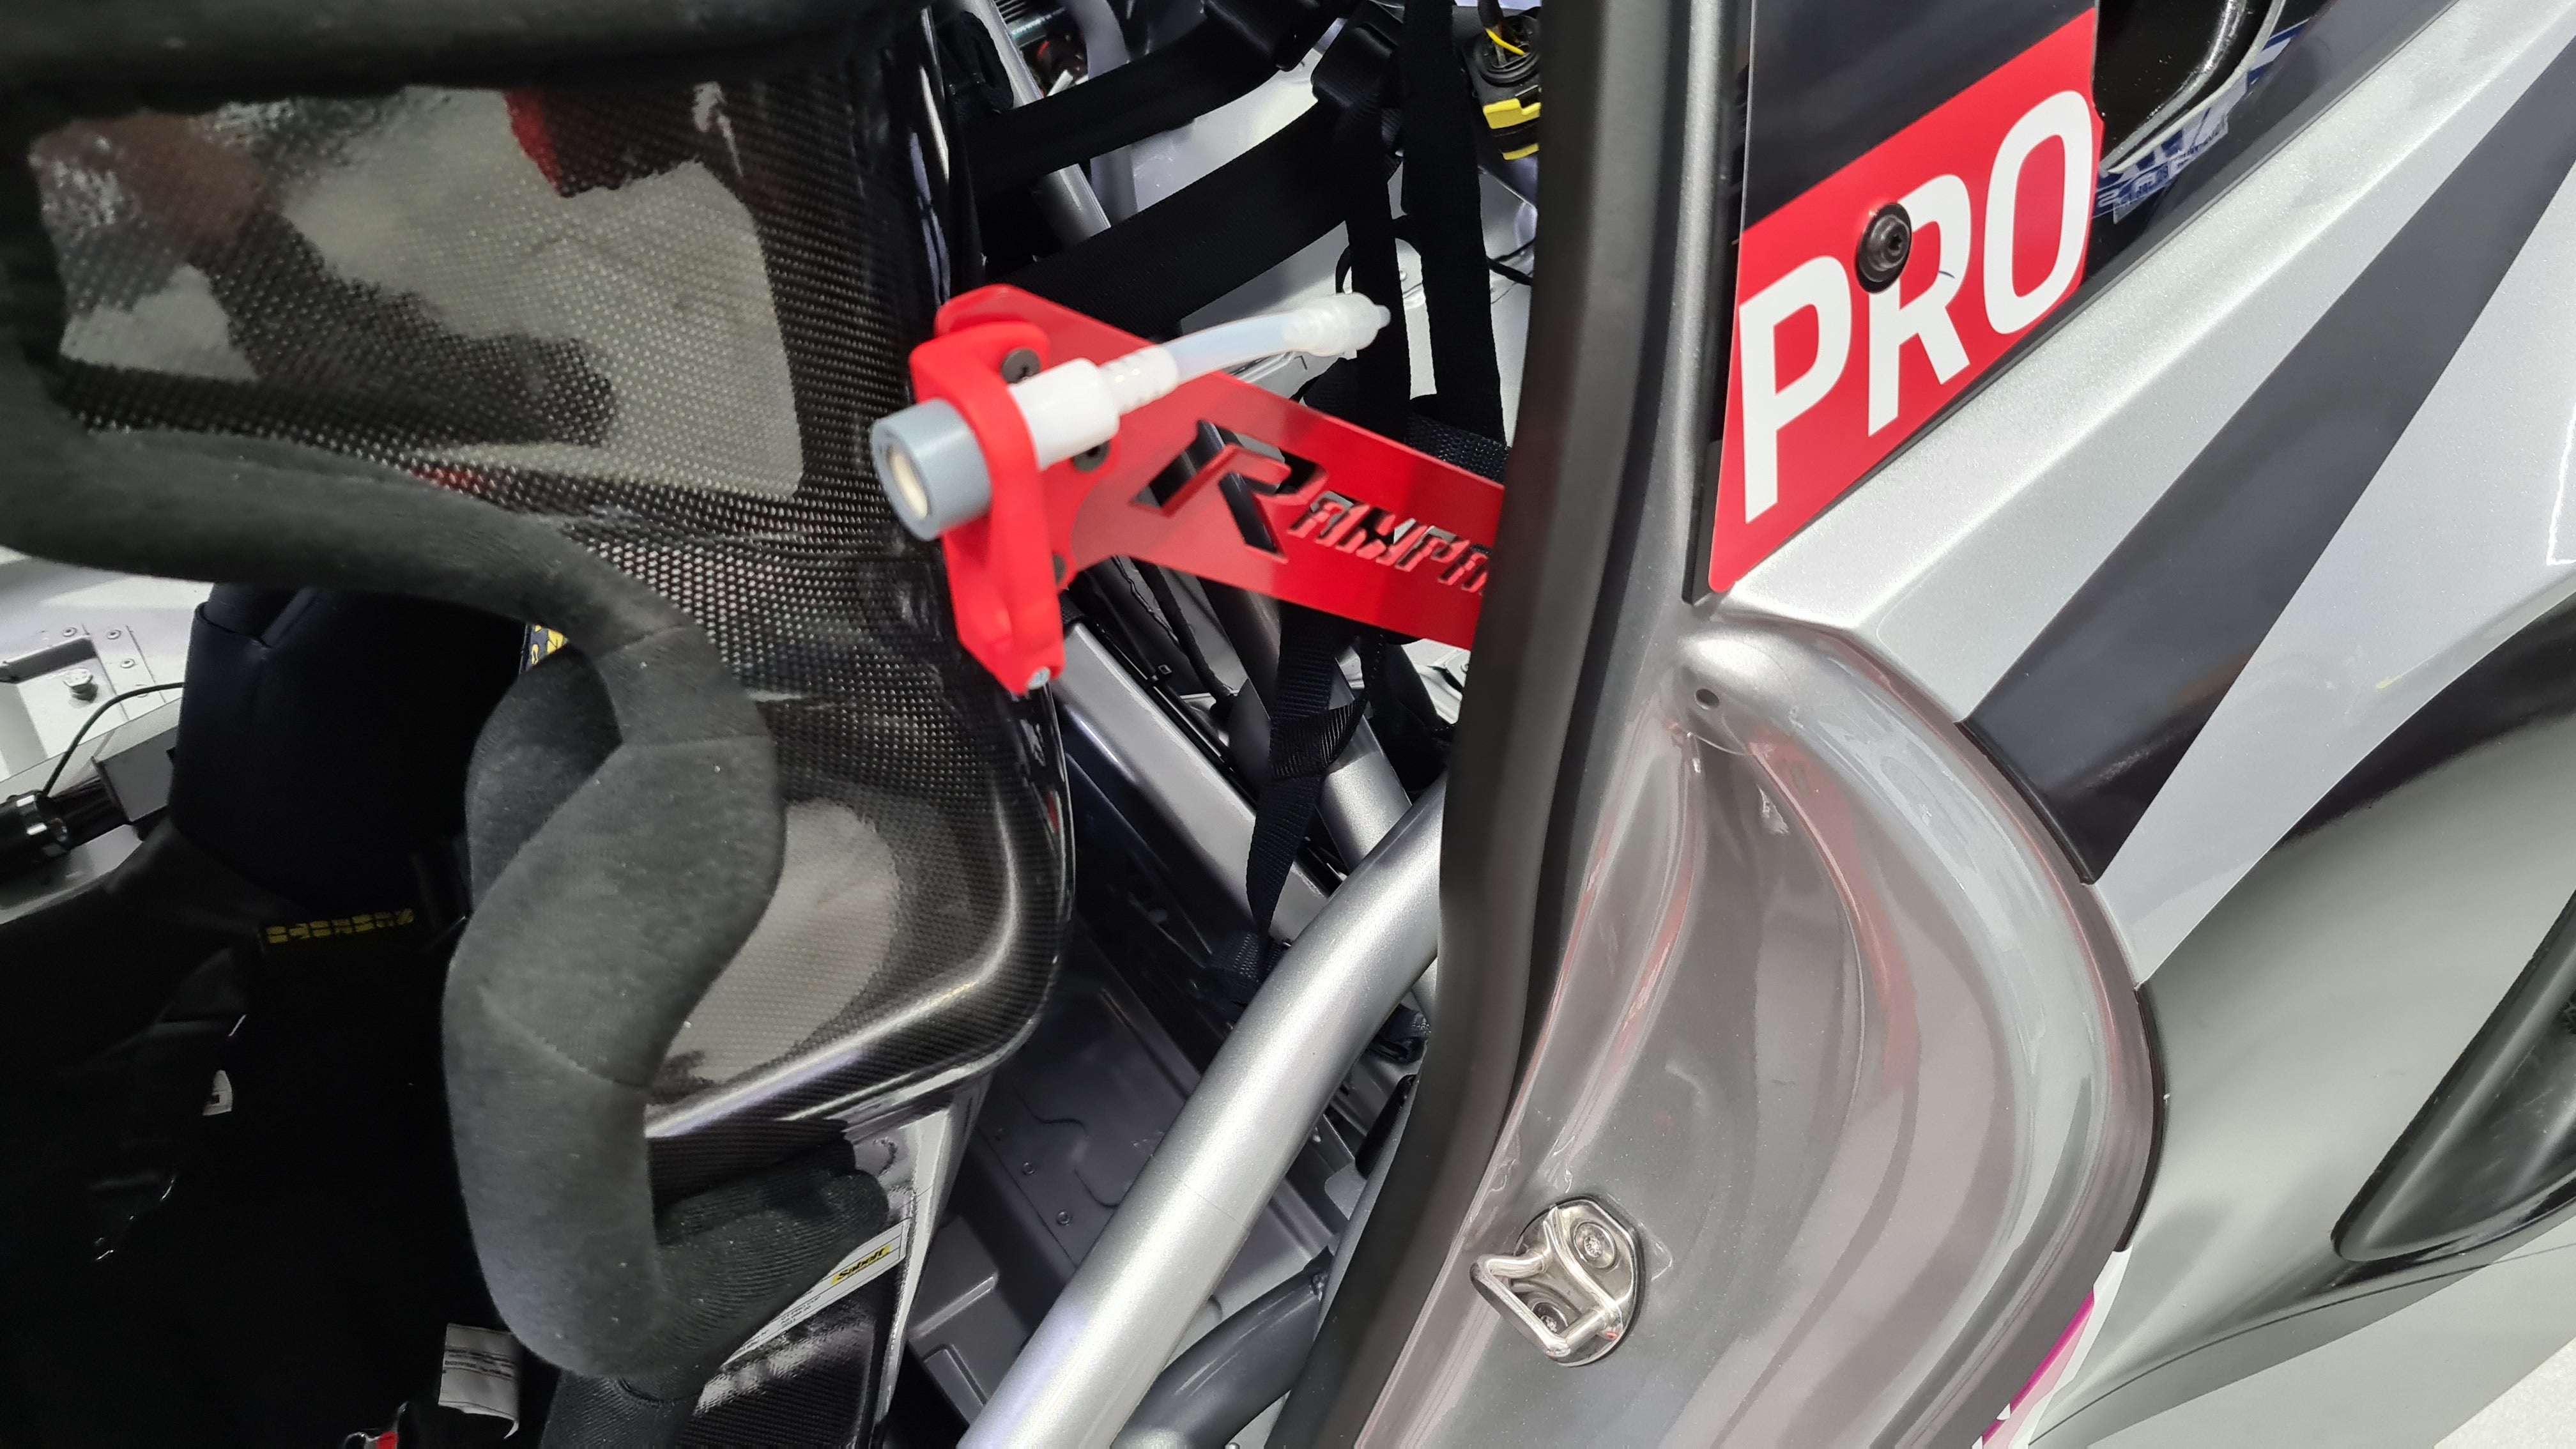 Porsche 992 , Carrera cup , 992 race car, 992 drink system, 992 quick connections, 12hr , 24hr, 6hr, enduro , drink system , quick connections , radio and drink fittings